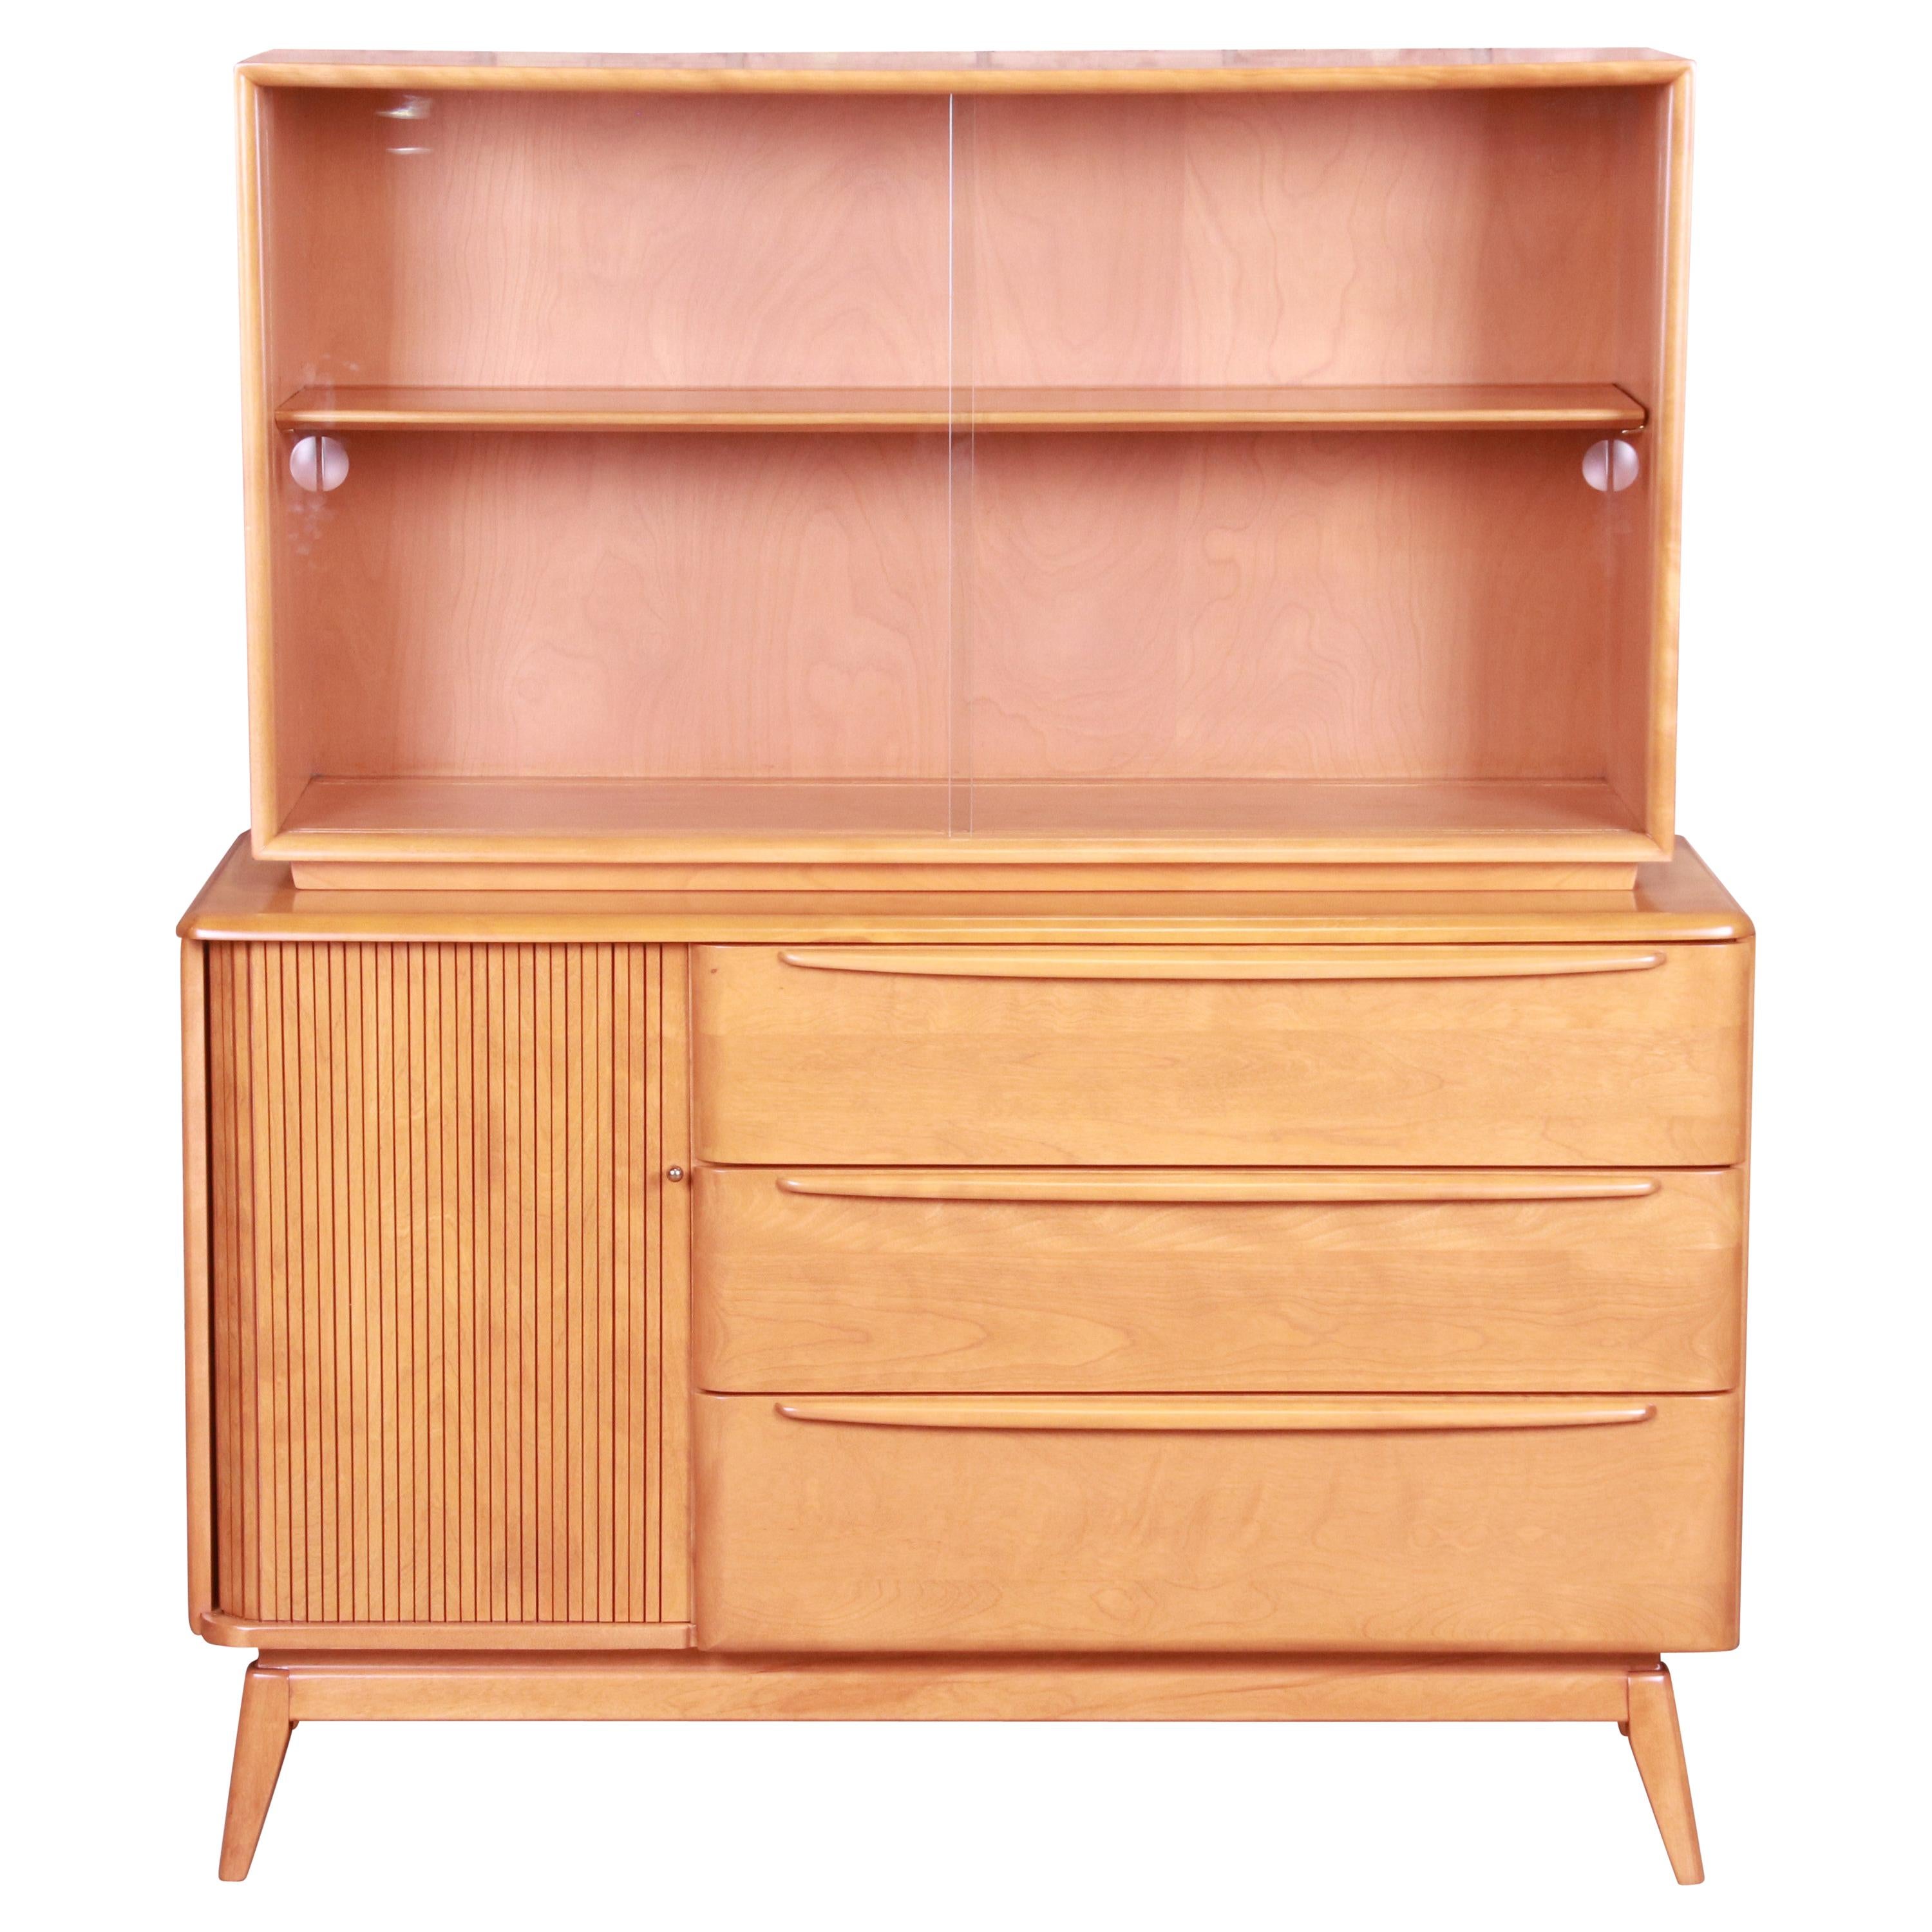 Heywood Wakefield Maple Tambour Door Credenza with Hutch Top, Newly Refinished